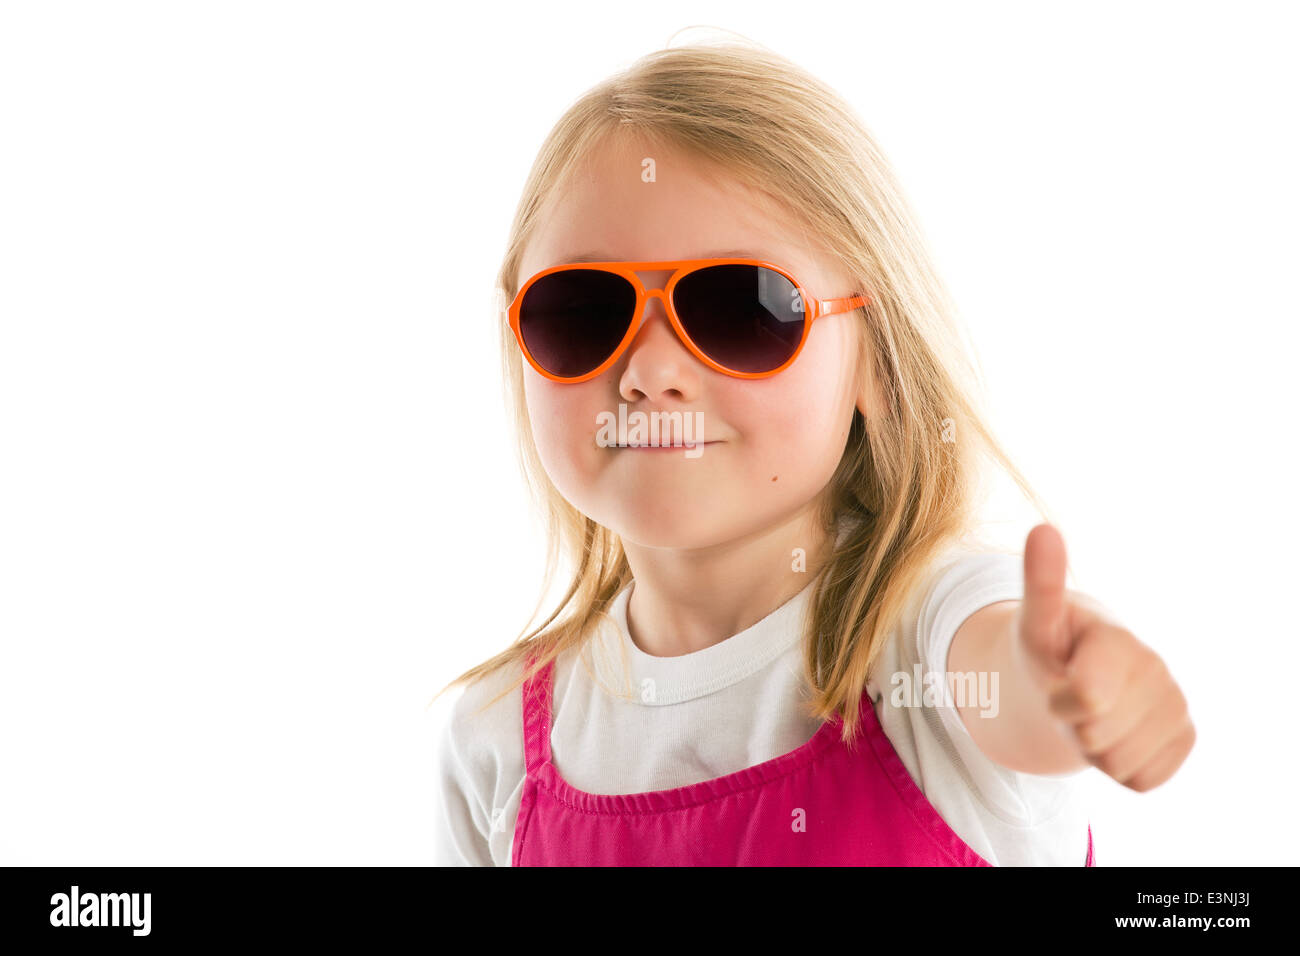 the little girl showing thumbs up Stock Photo